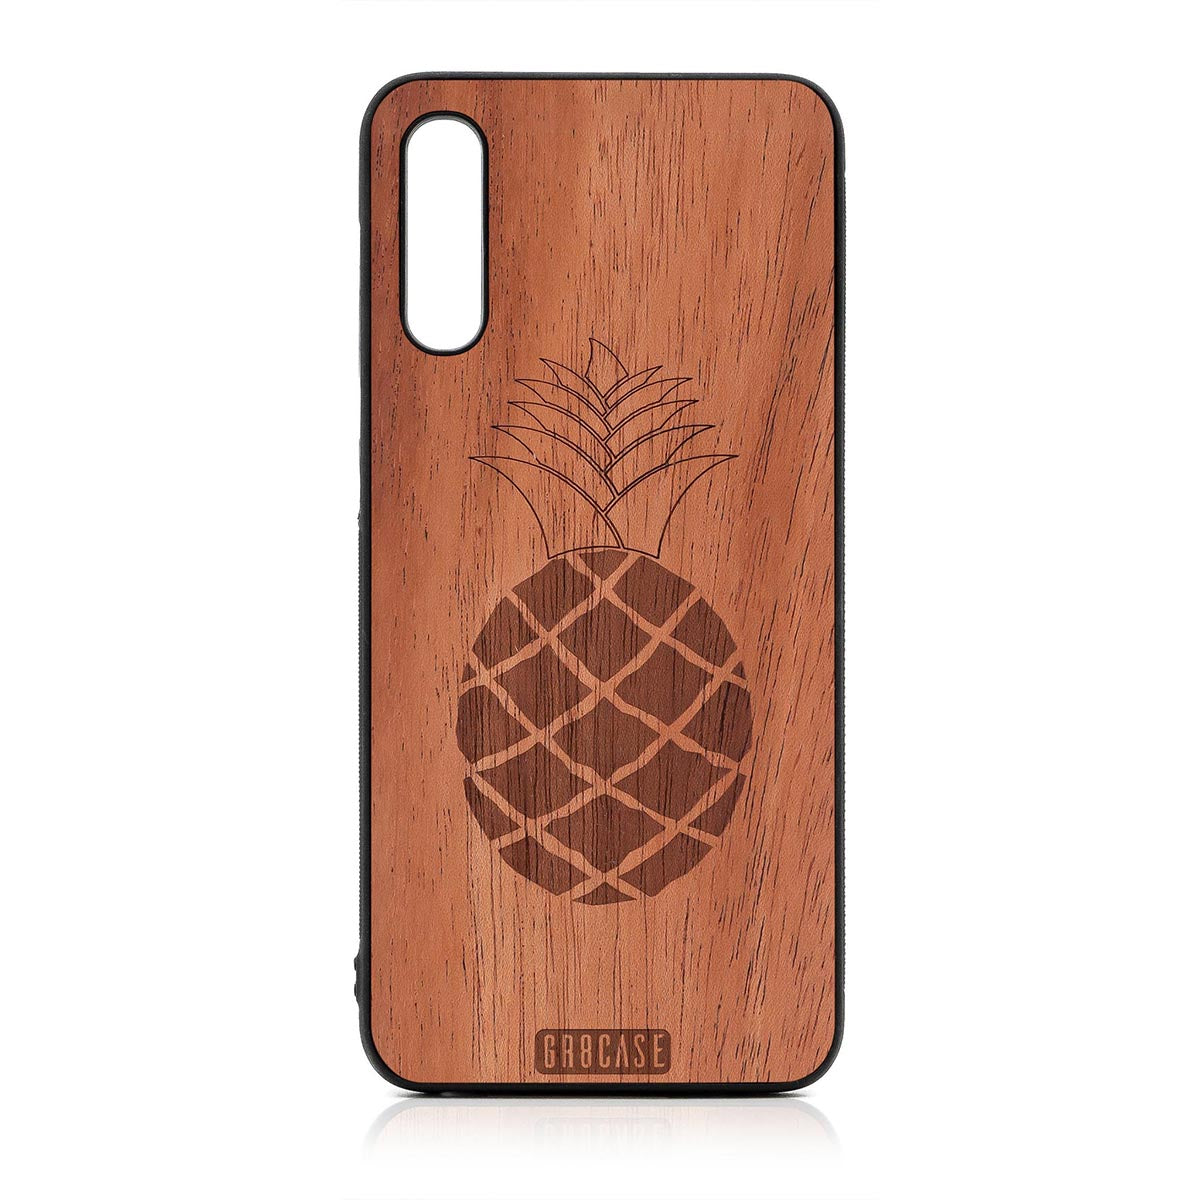 Pineapple Design Wood Case For Samsung Galaxy A50 by GR8CASE